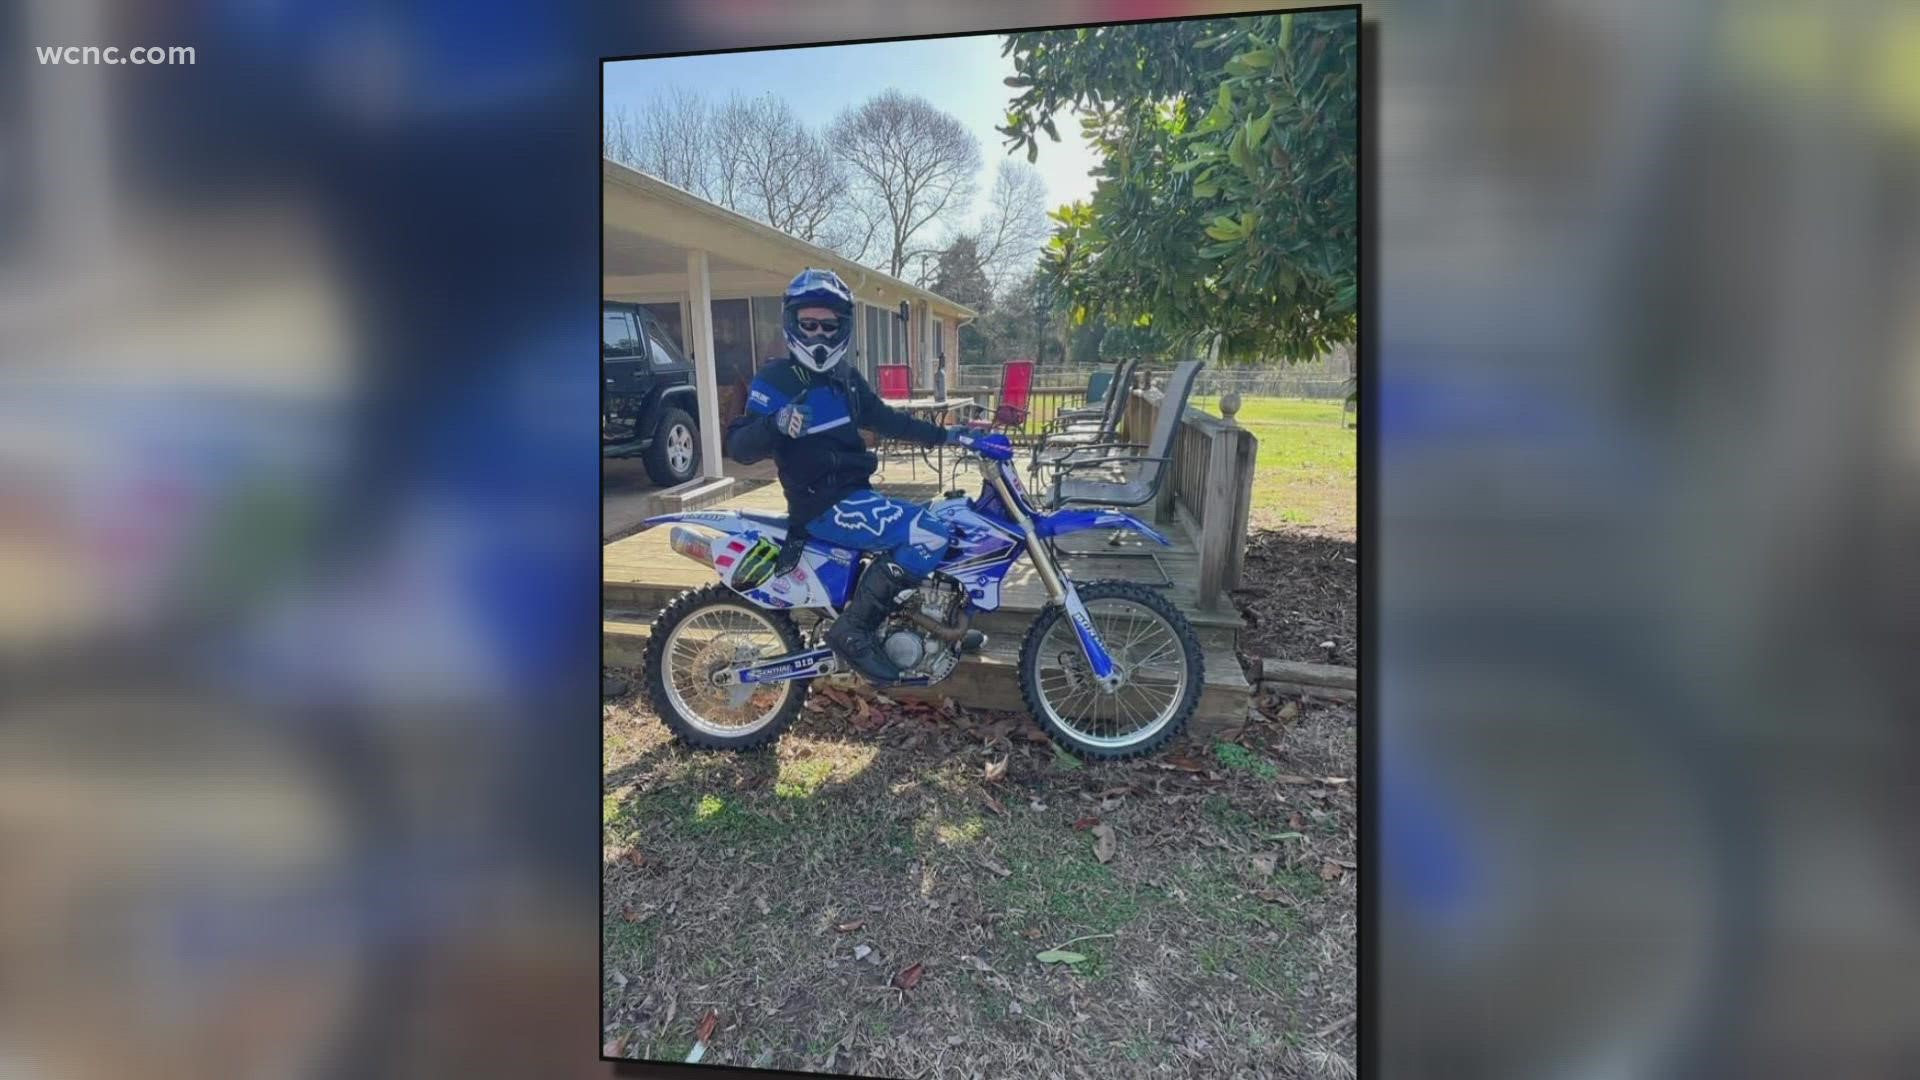 Talon Dyson, 11, died after a dirt-bike accident Sunday. He's the son of Iredell County Sheriff's Office Lieutenant Amy Dyson.